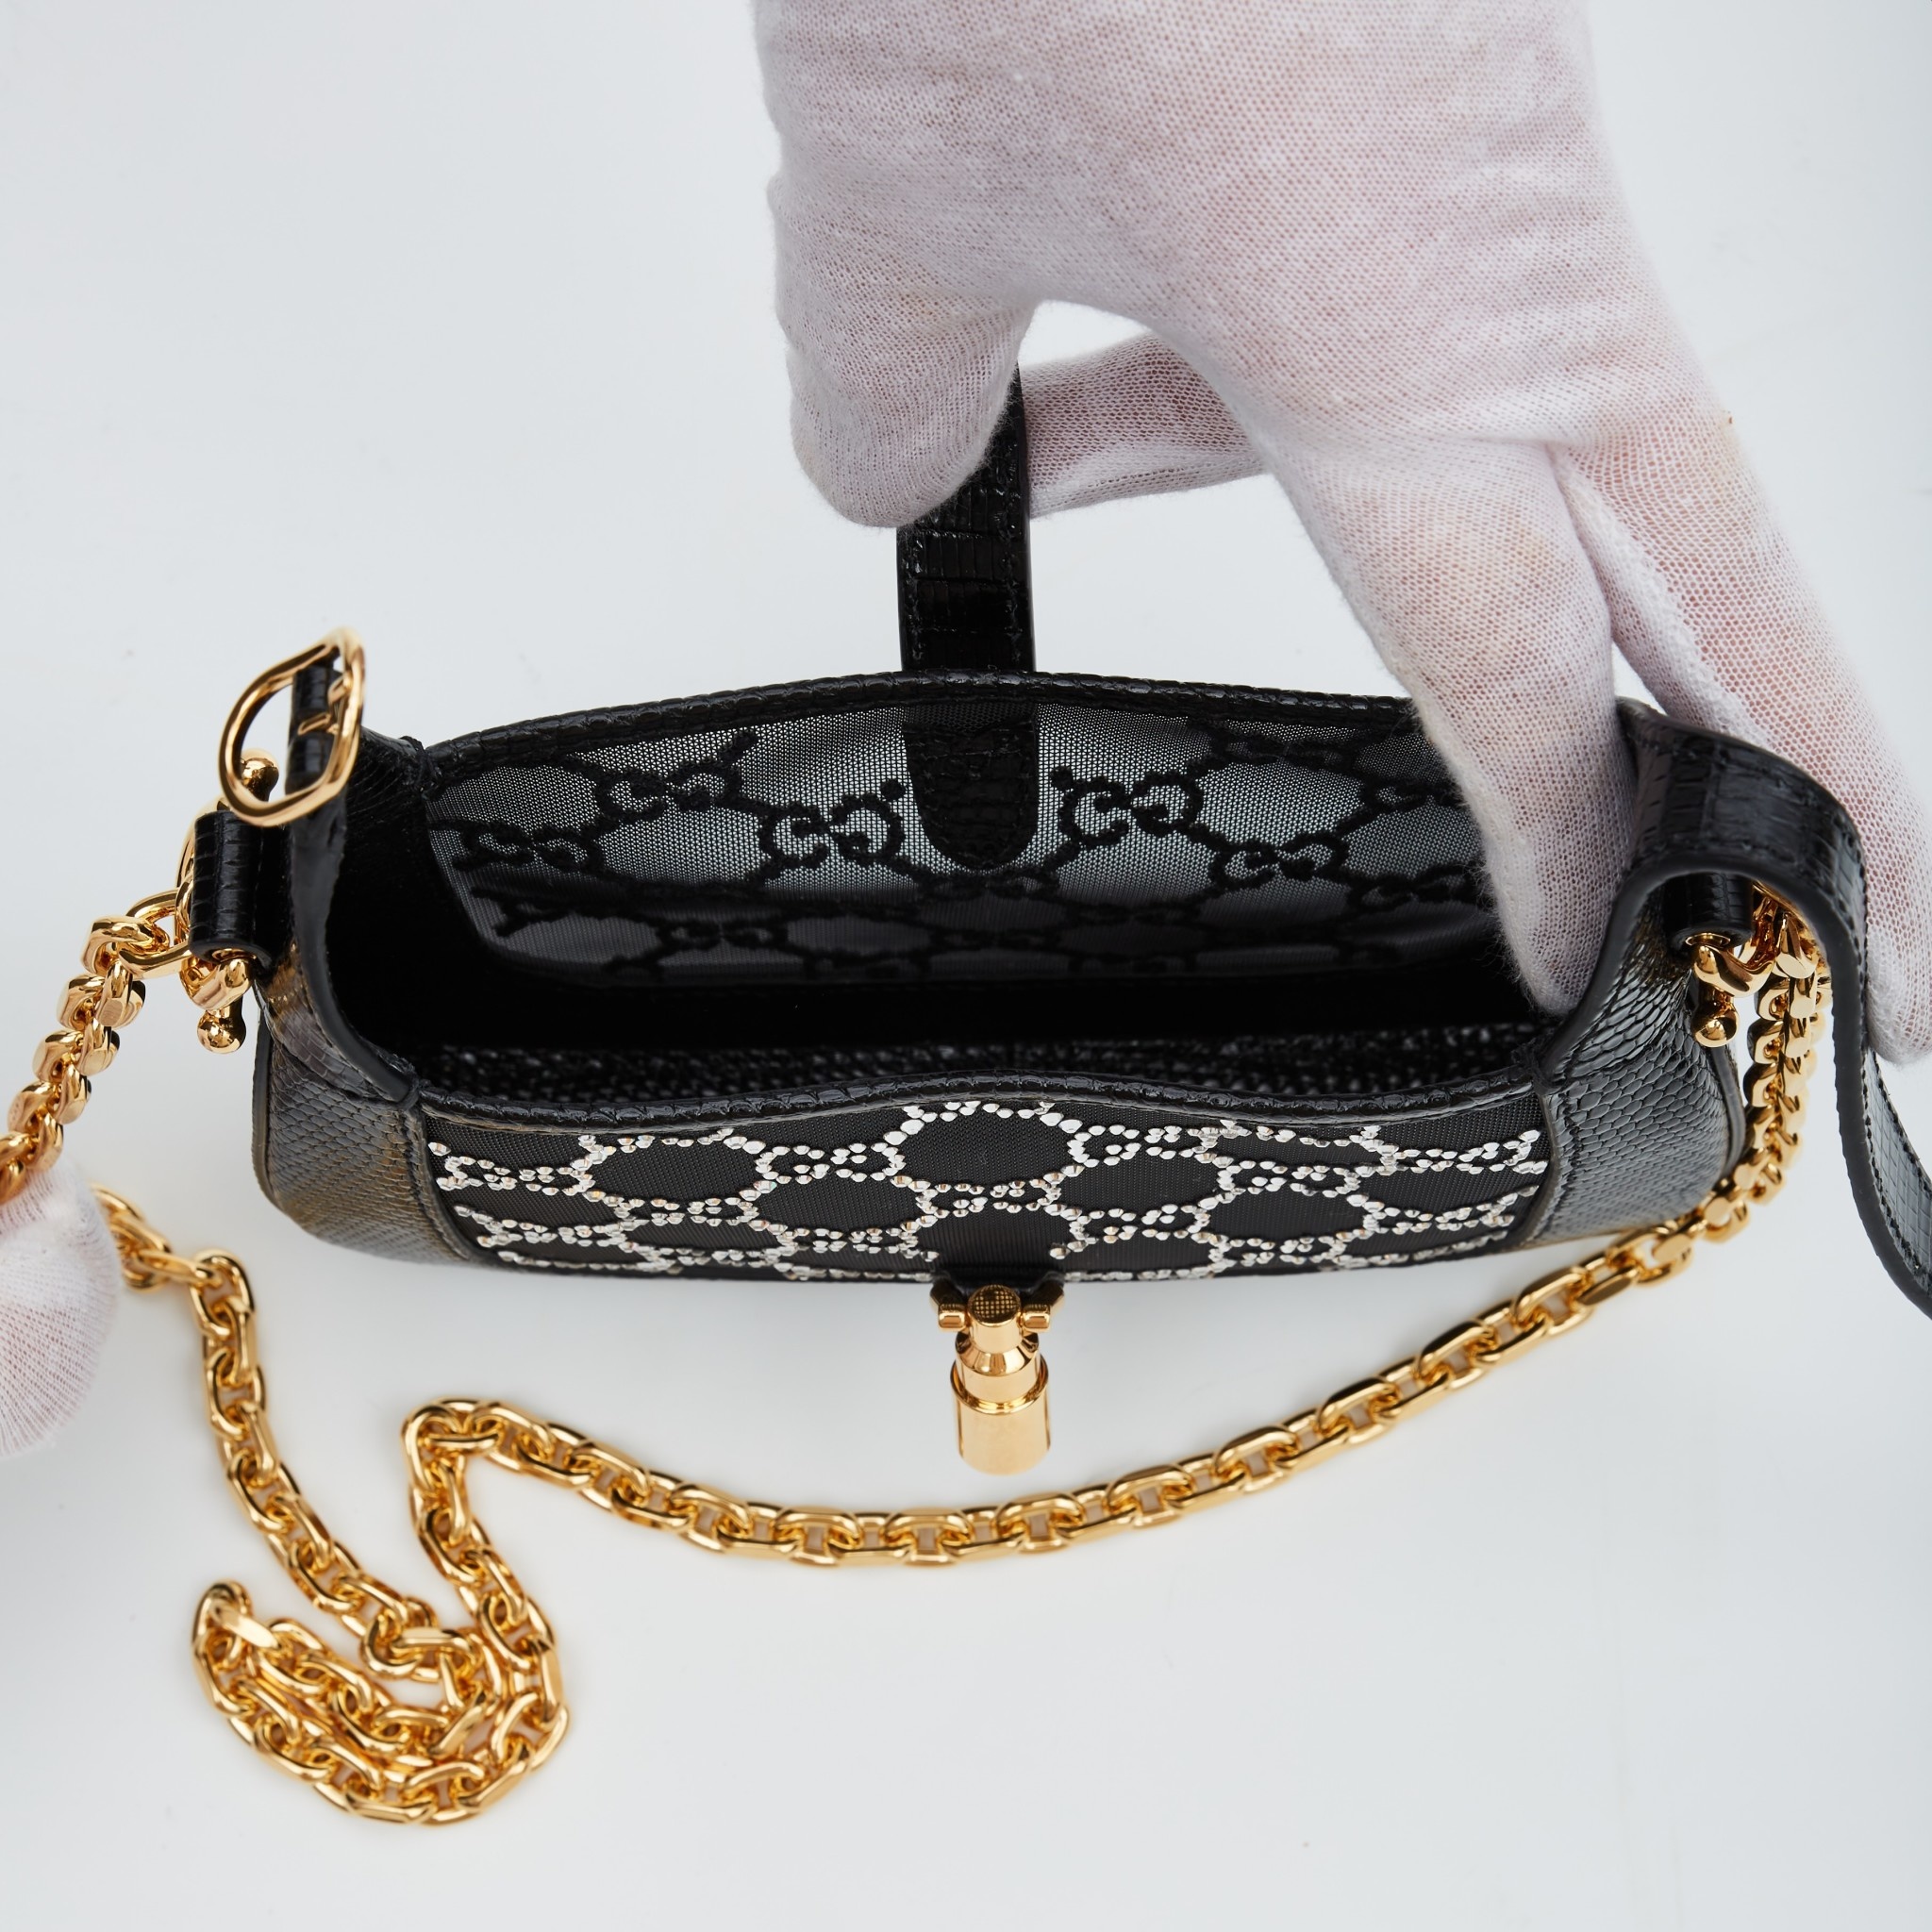 How To Authenticate the Gucci Jackie Bag